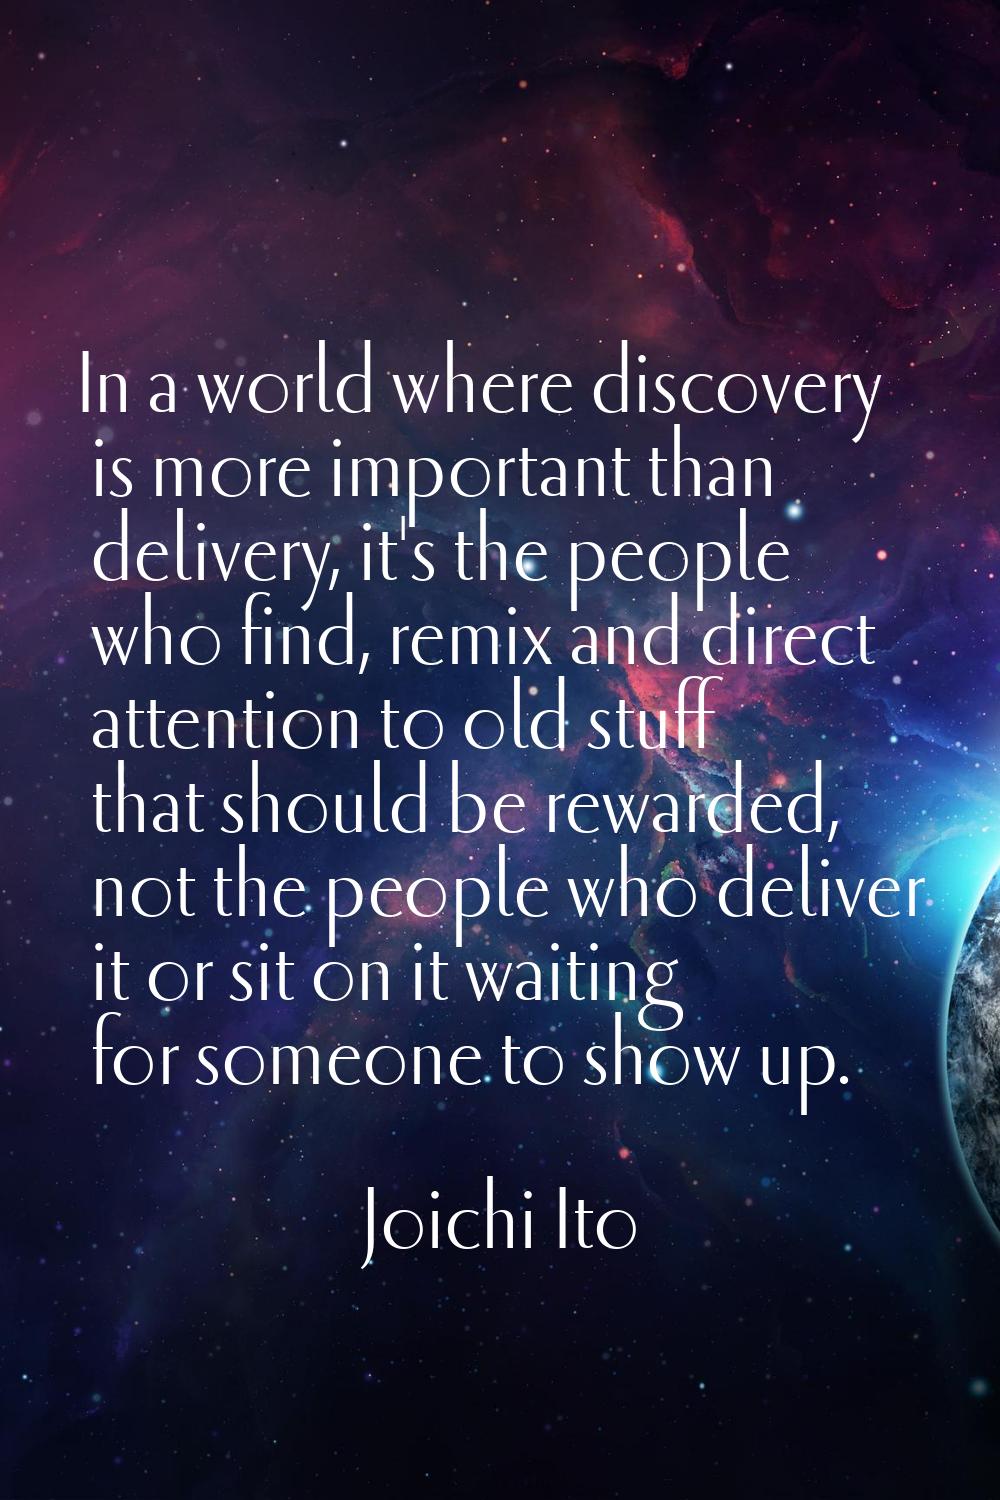 In a world where discovery is more important than delivery, it's the people who find, remix and dir